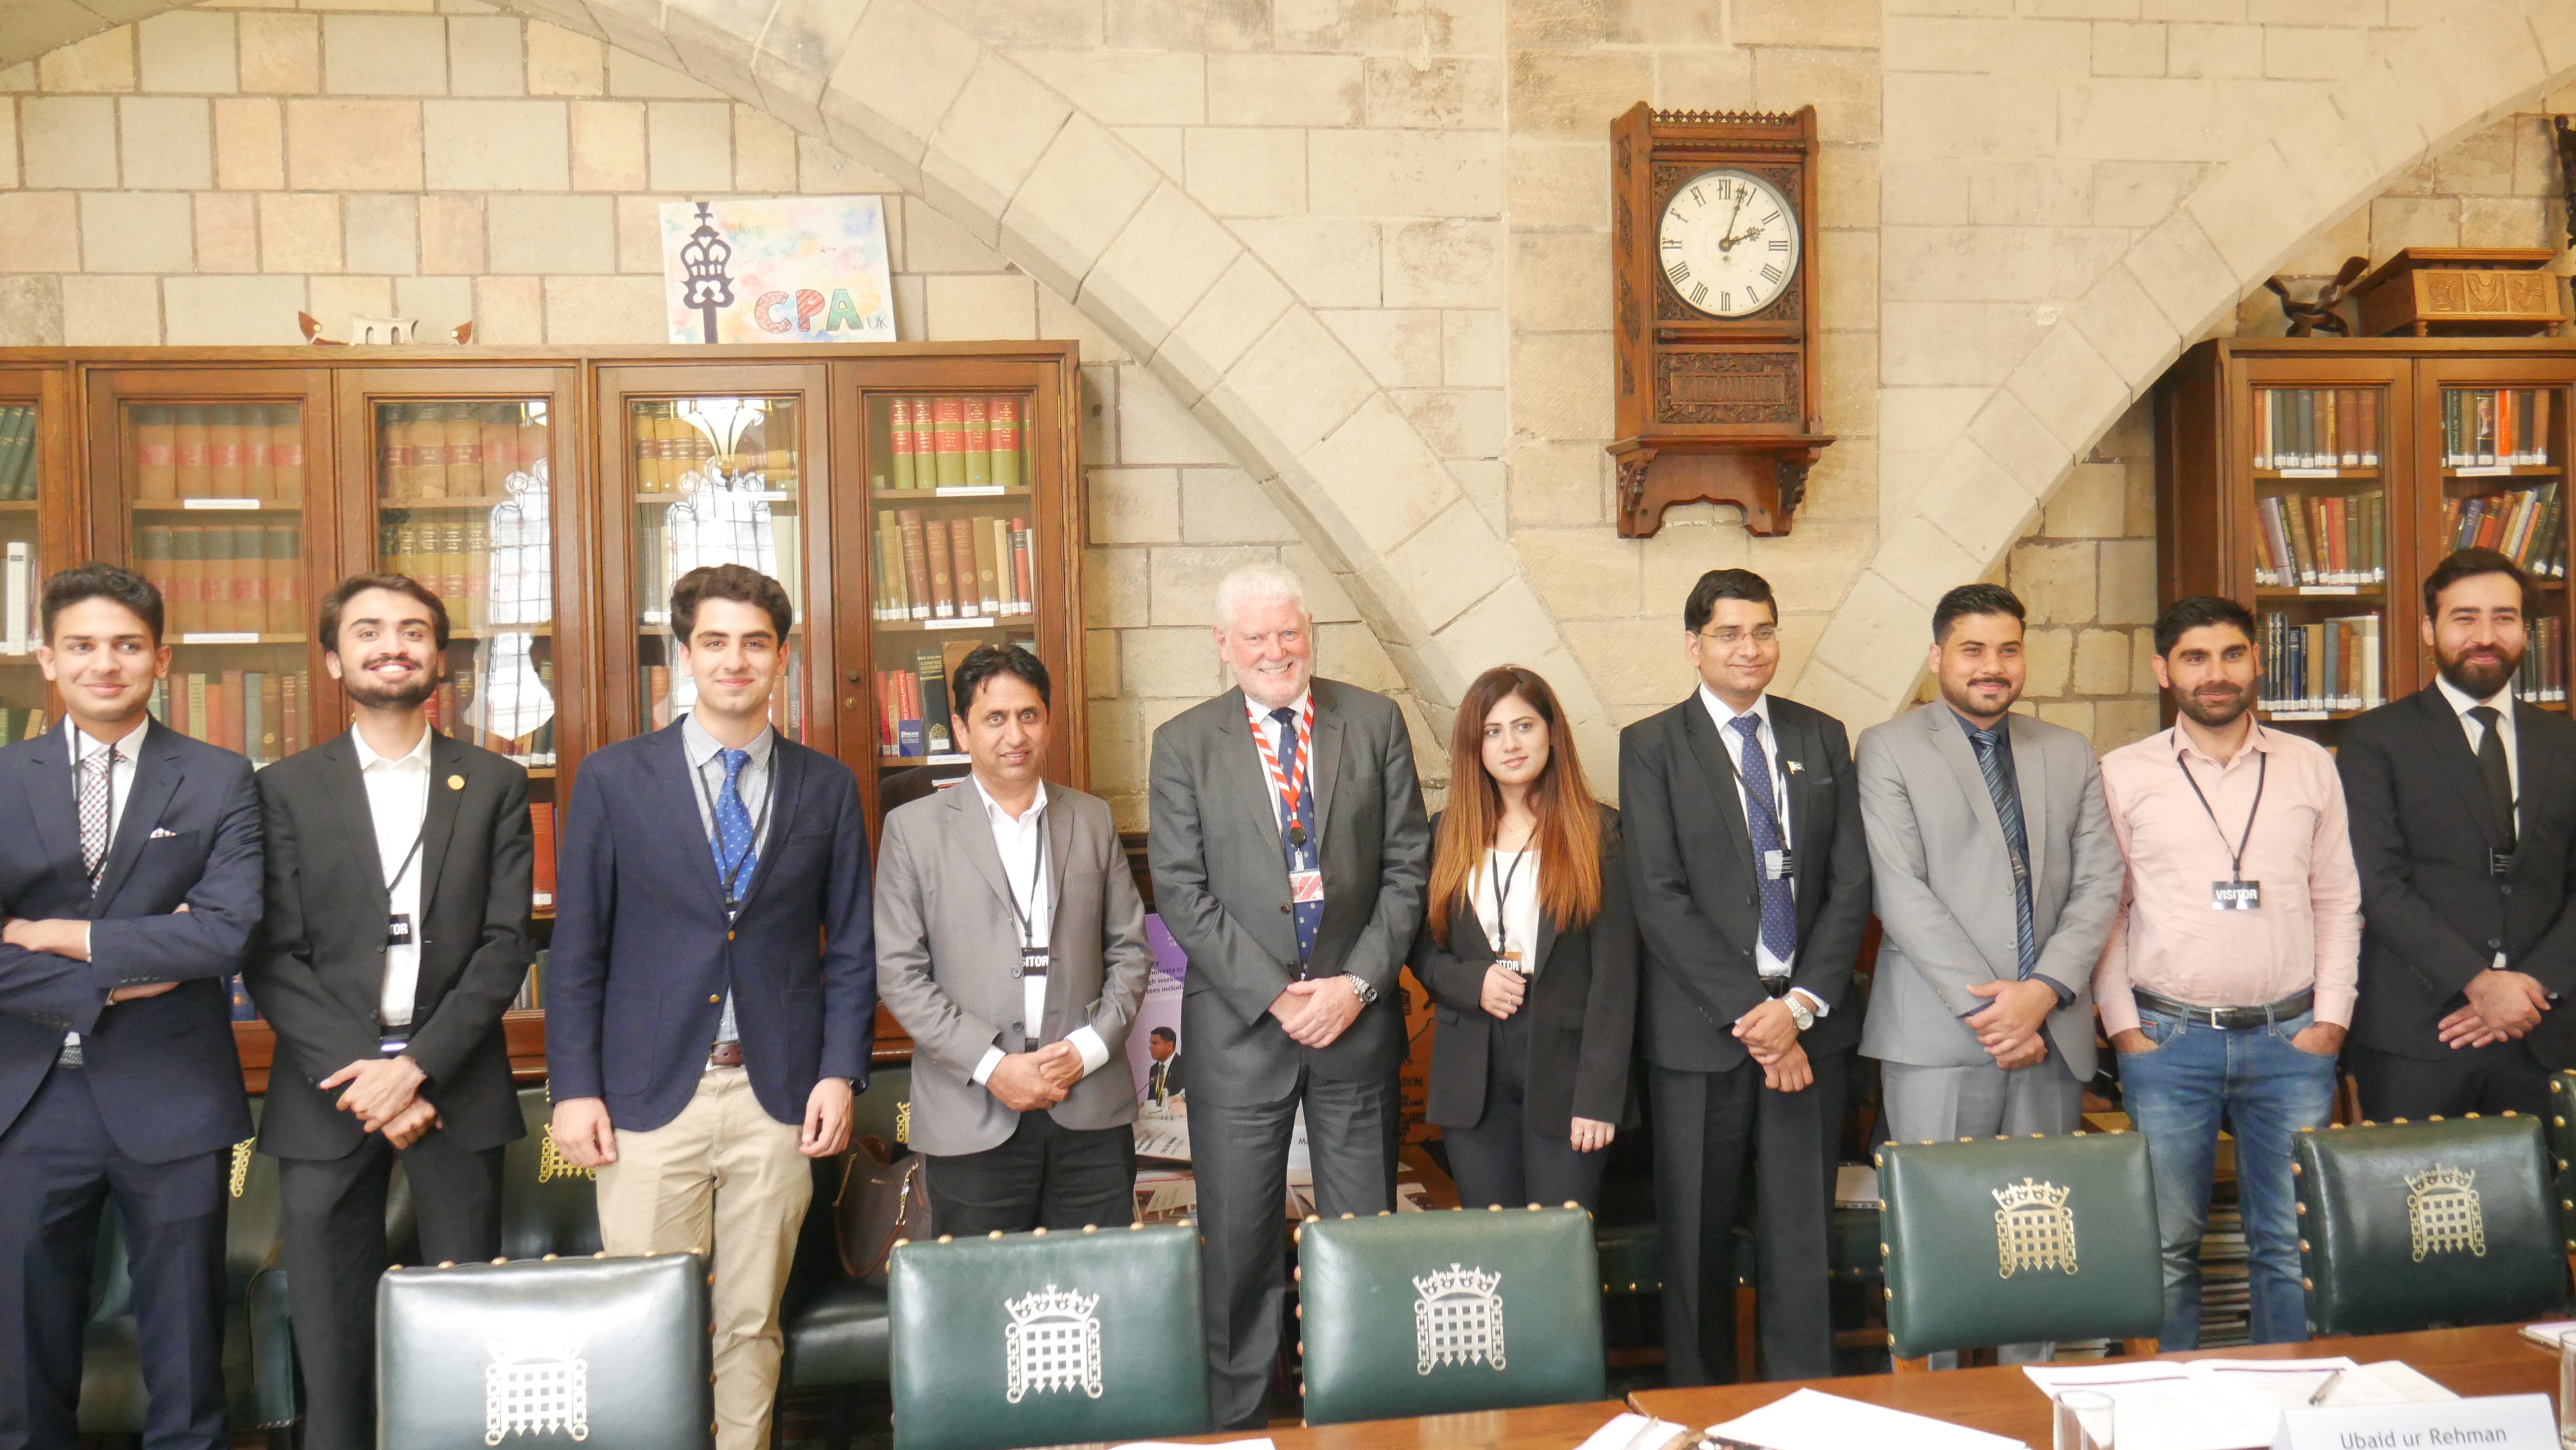 The delegation met with Lord Davies of Gower and discussed the UK's devolved structure, as well as the role of the House of Lords and its relationship with the House of Commons